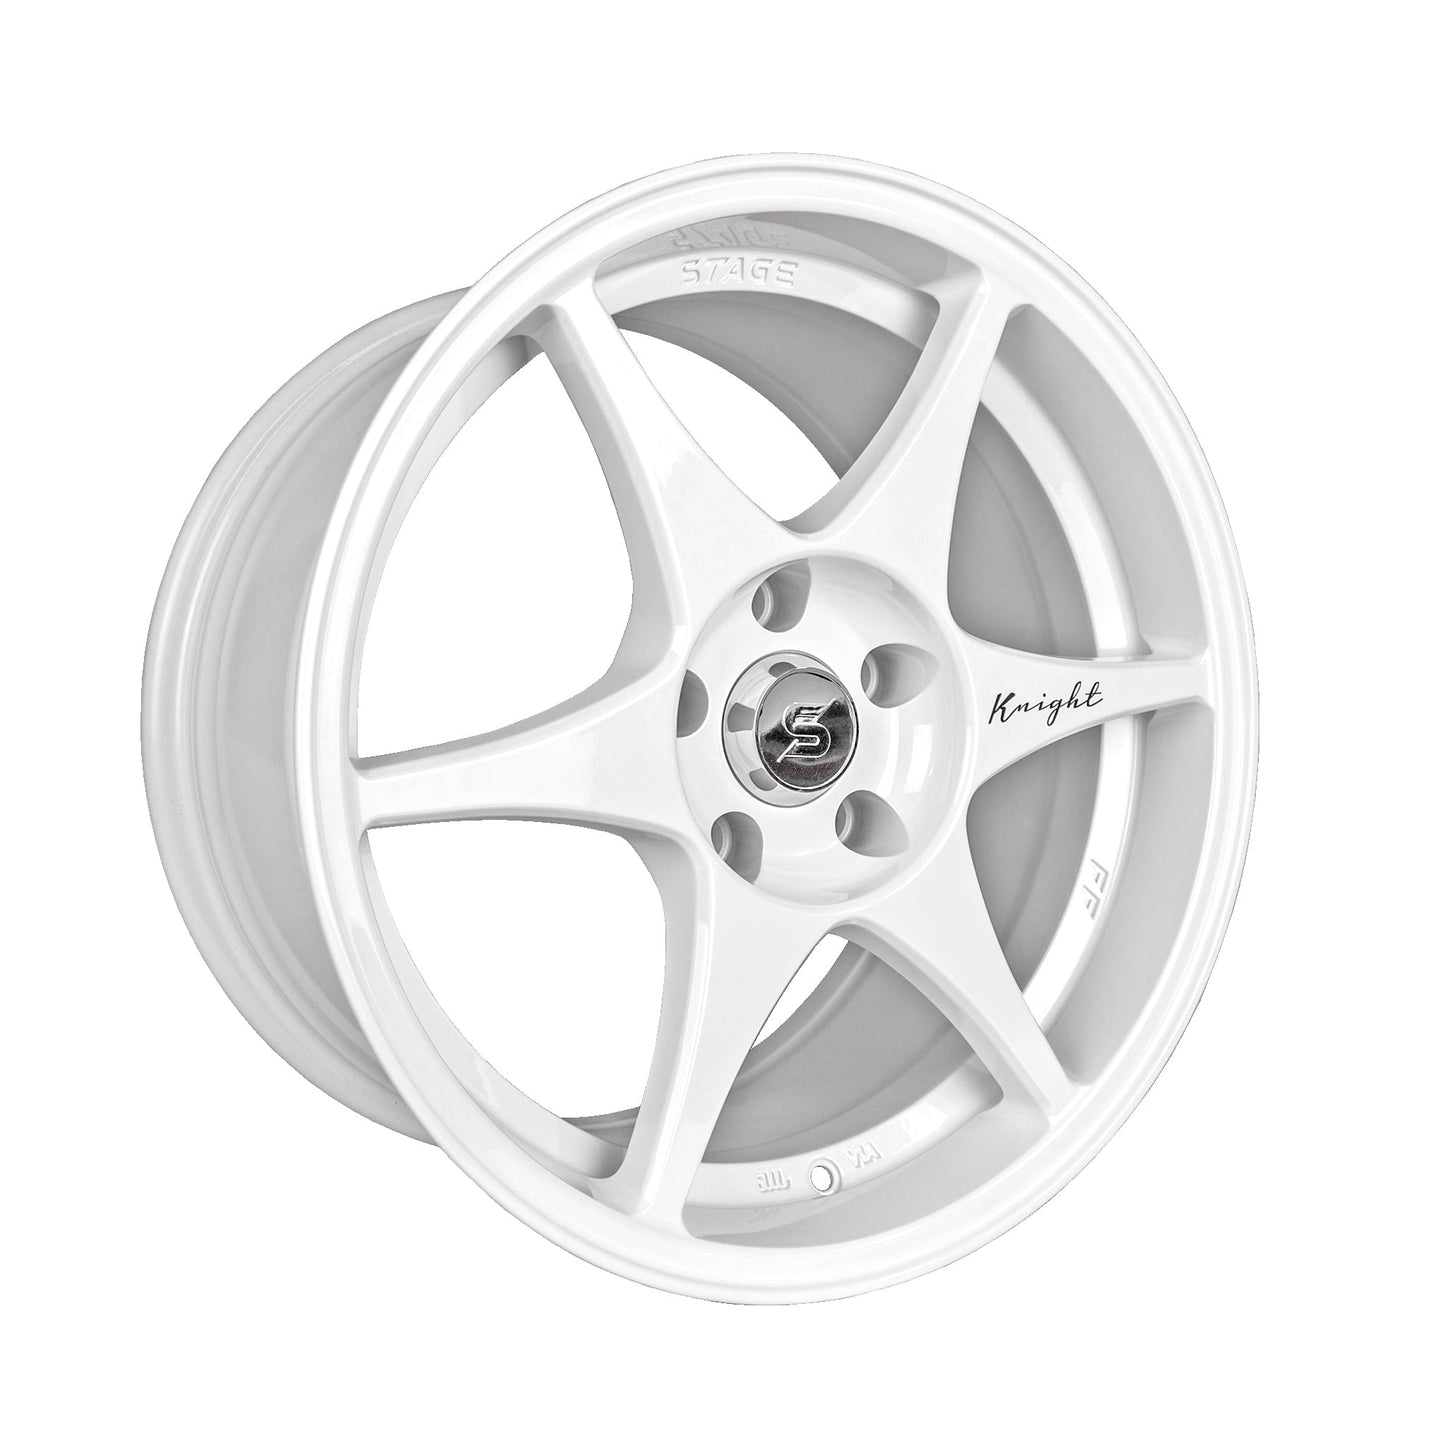 Stage Wheels Knight 17x9 +35mm 5x114.3 CB: 73.1 Color: White